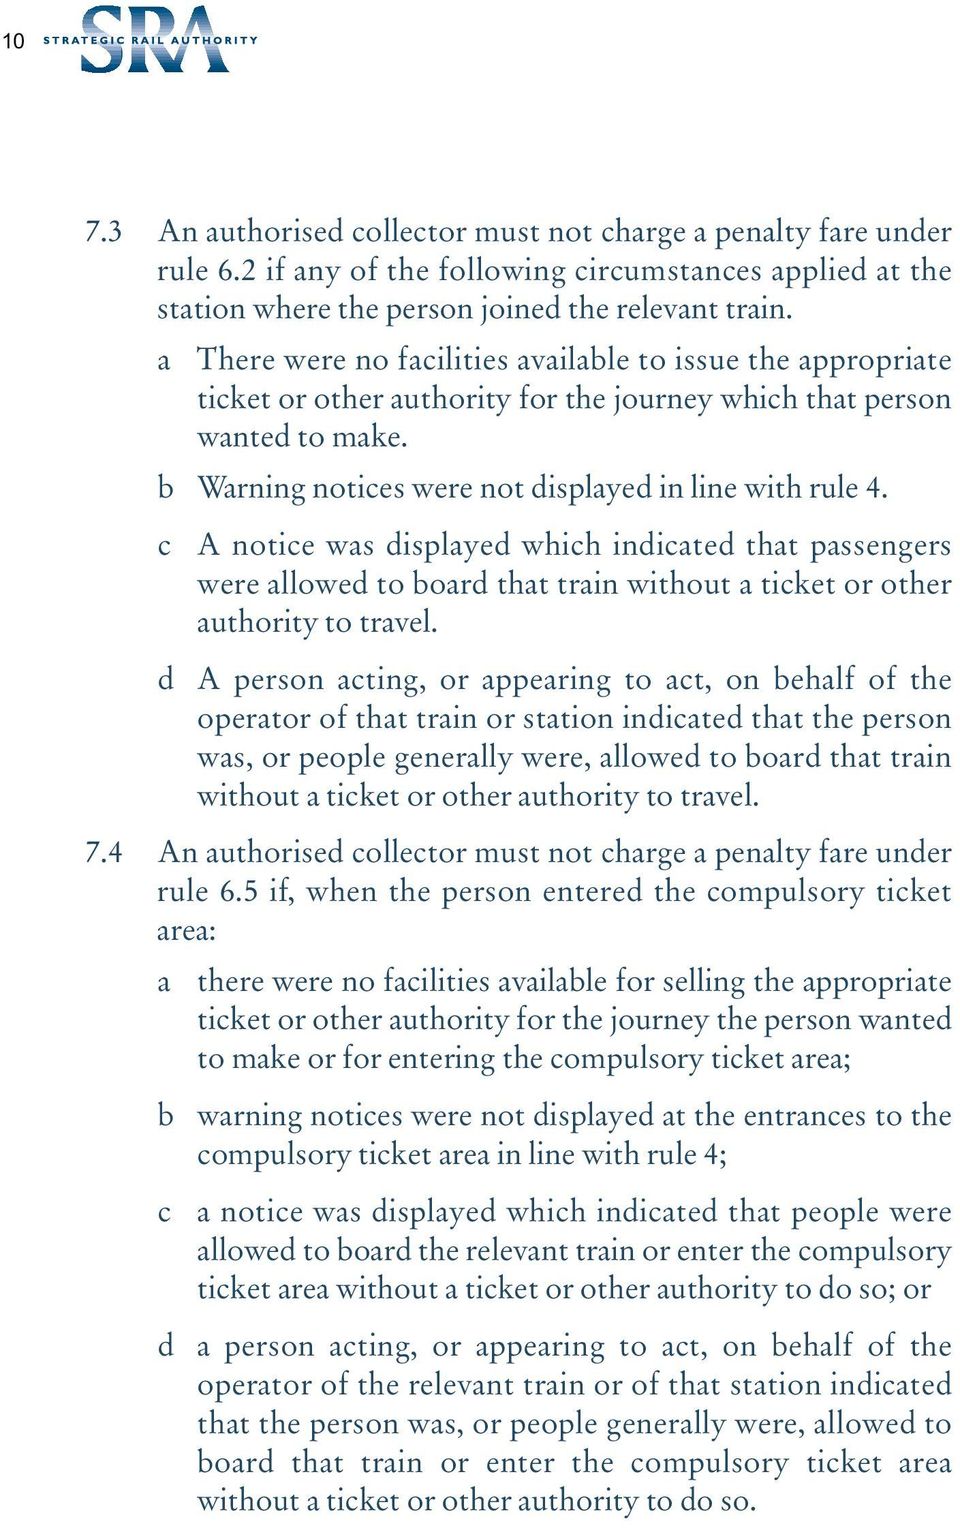 c A notice was displayed which indicated that passengers were allowed to board that train without a ticket or other authority to travel.